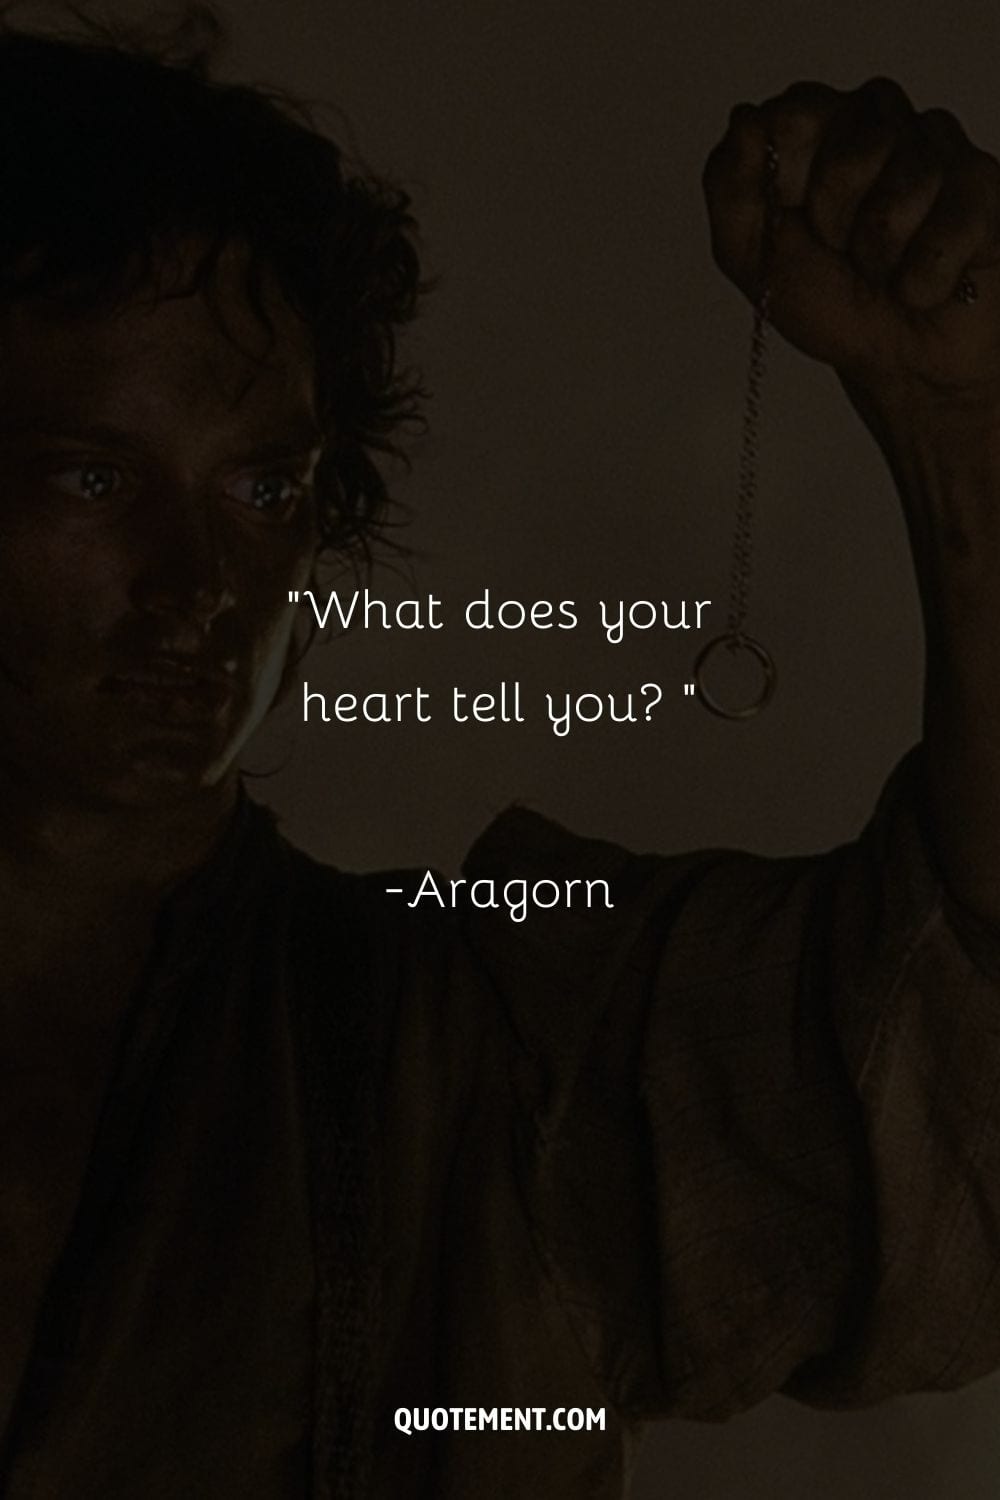 What does your heart tell you